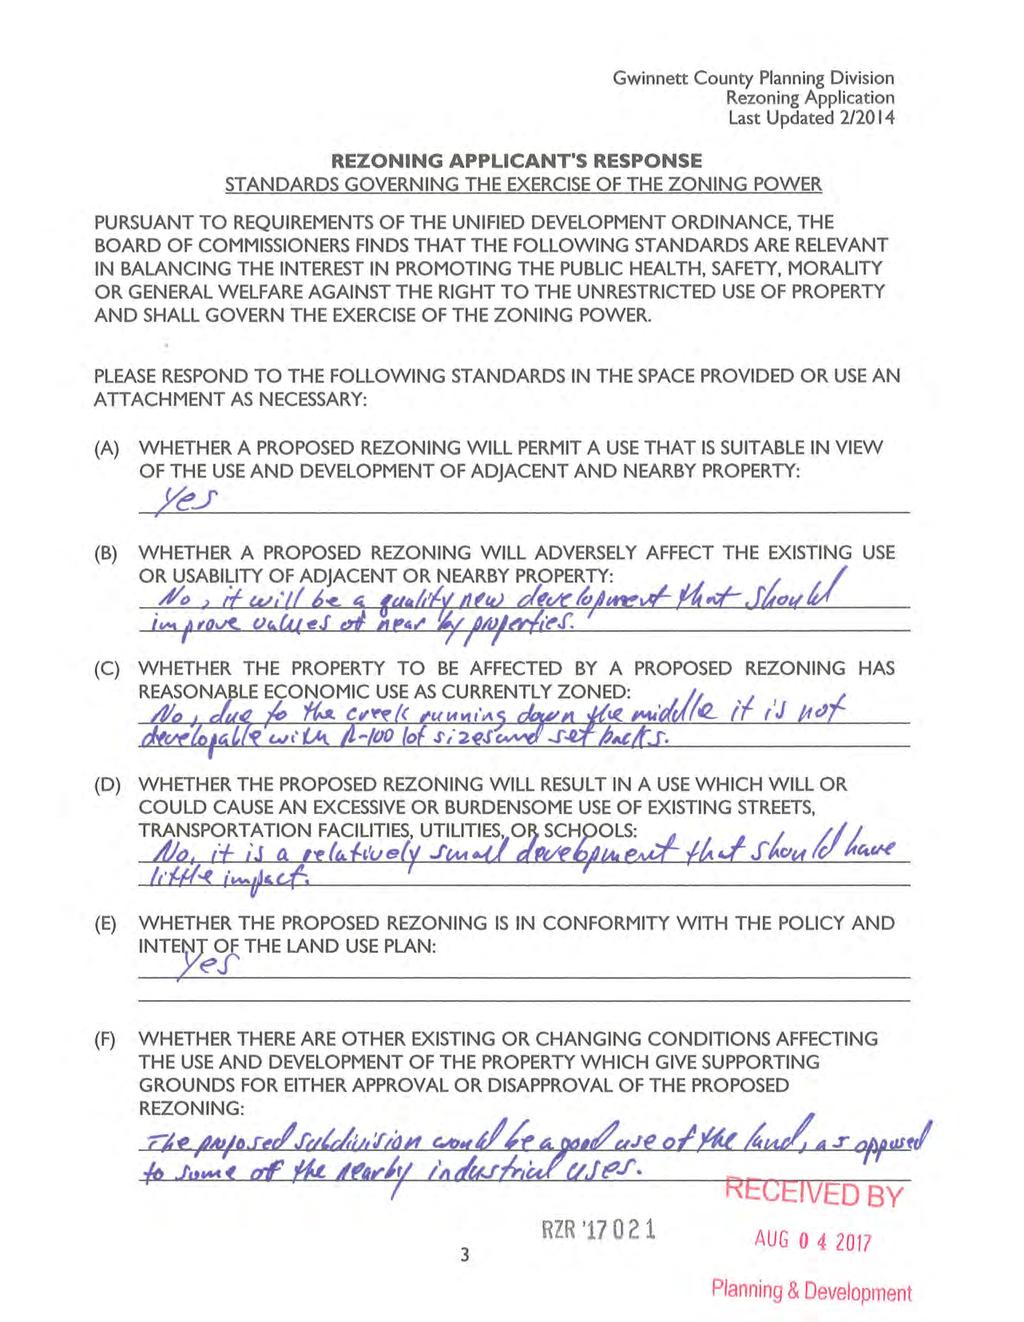 REZONING APPLICANT'S RESPONSE STANDARDS GOVERNING THE EXERCISE OF THE ZONING POWER PURSUANT TO REQUIREMENTS OF THE UNIFIED DEVELOPMENT ORDINANCE, THE BOARD OF COMMISSIONERS FINDS THAT THE FOLLOWING